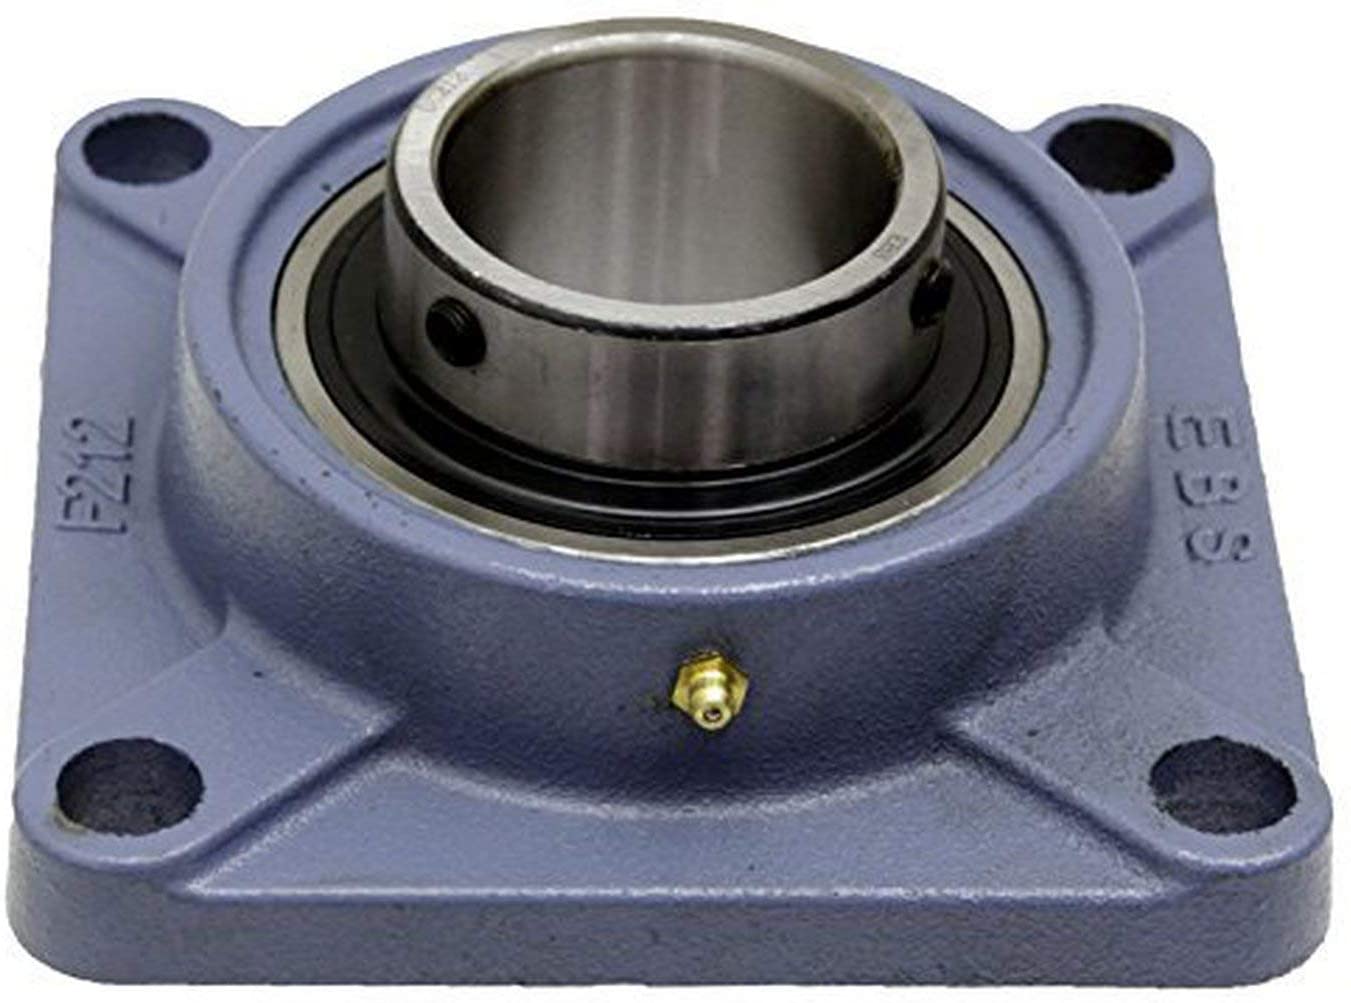 UCF206-18  PREMIUM Normal duty 4 bolt cast iron flange self-lube housed unit - Imperial Thumbnail